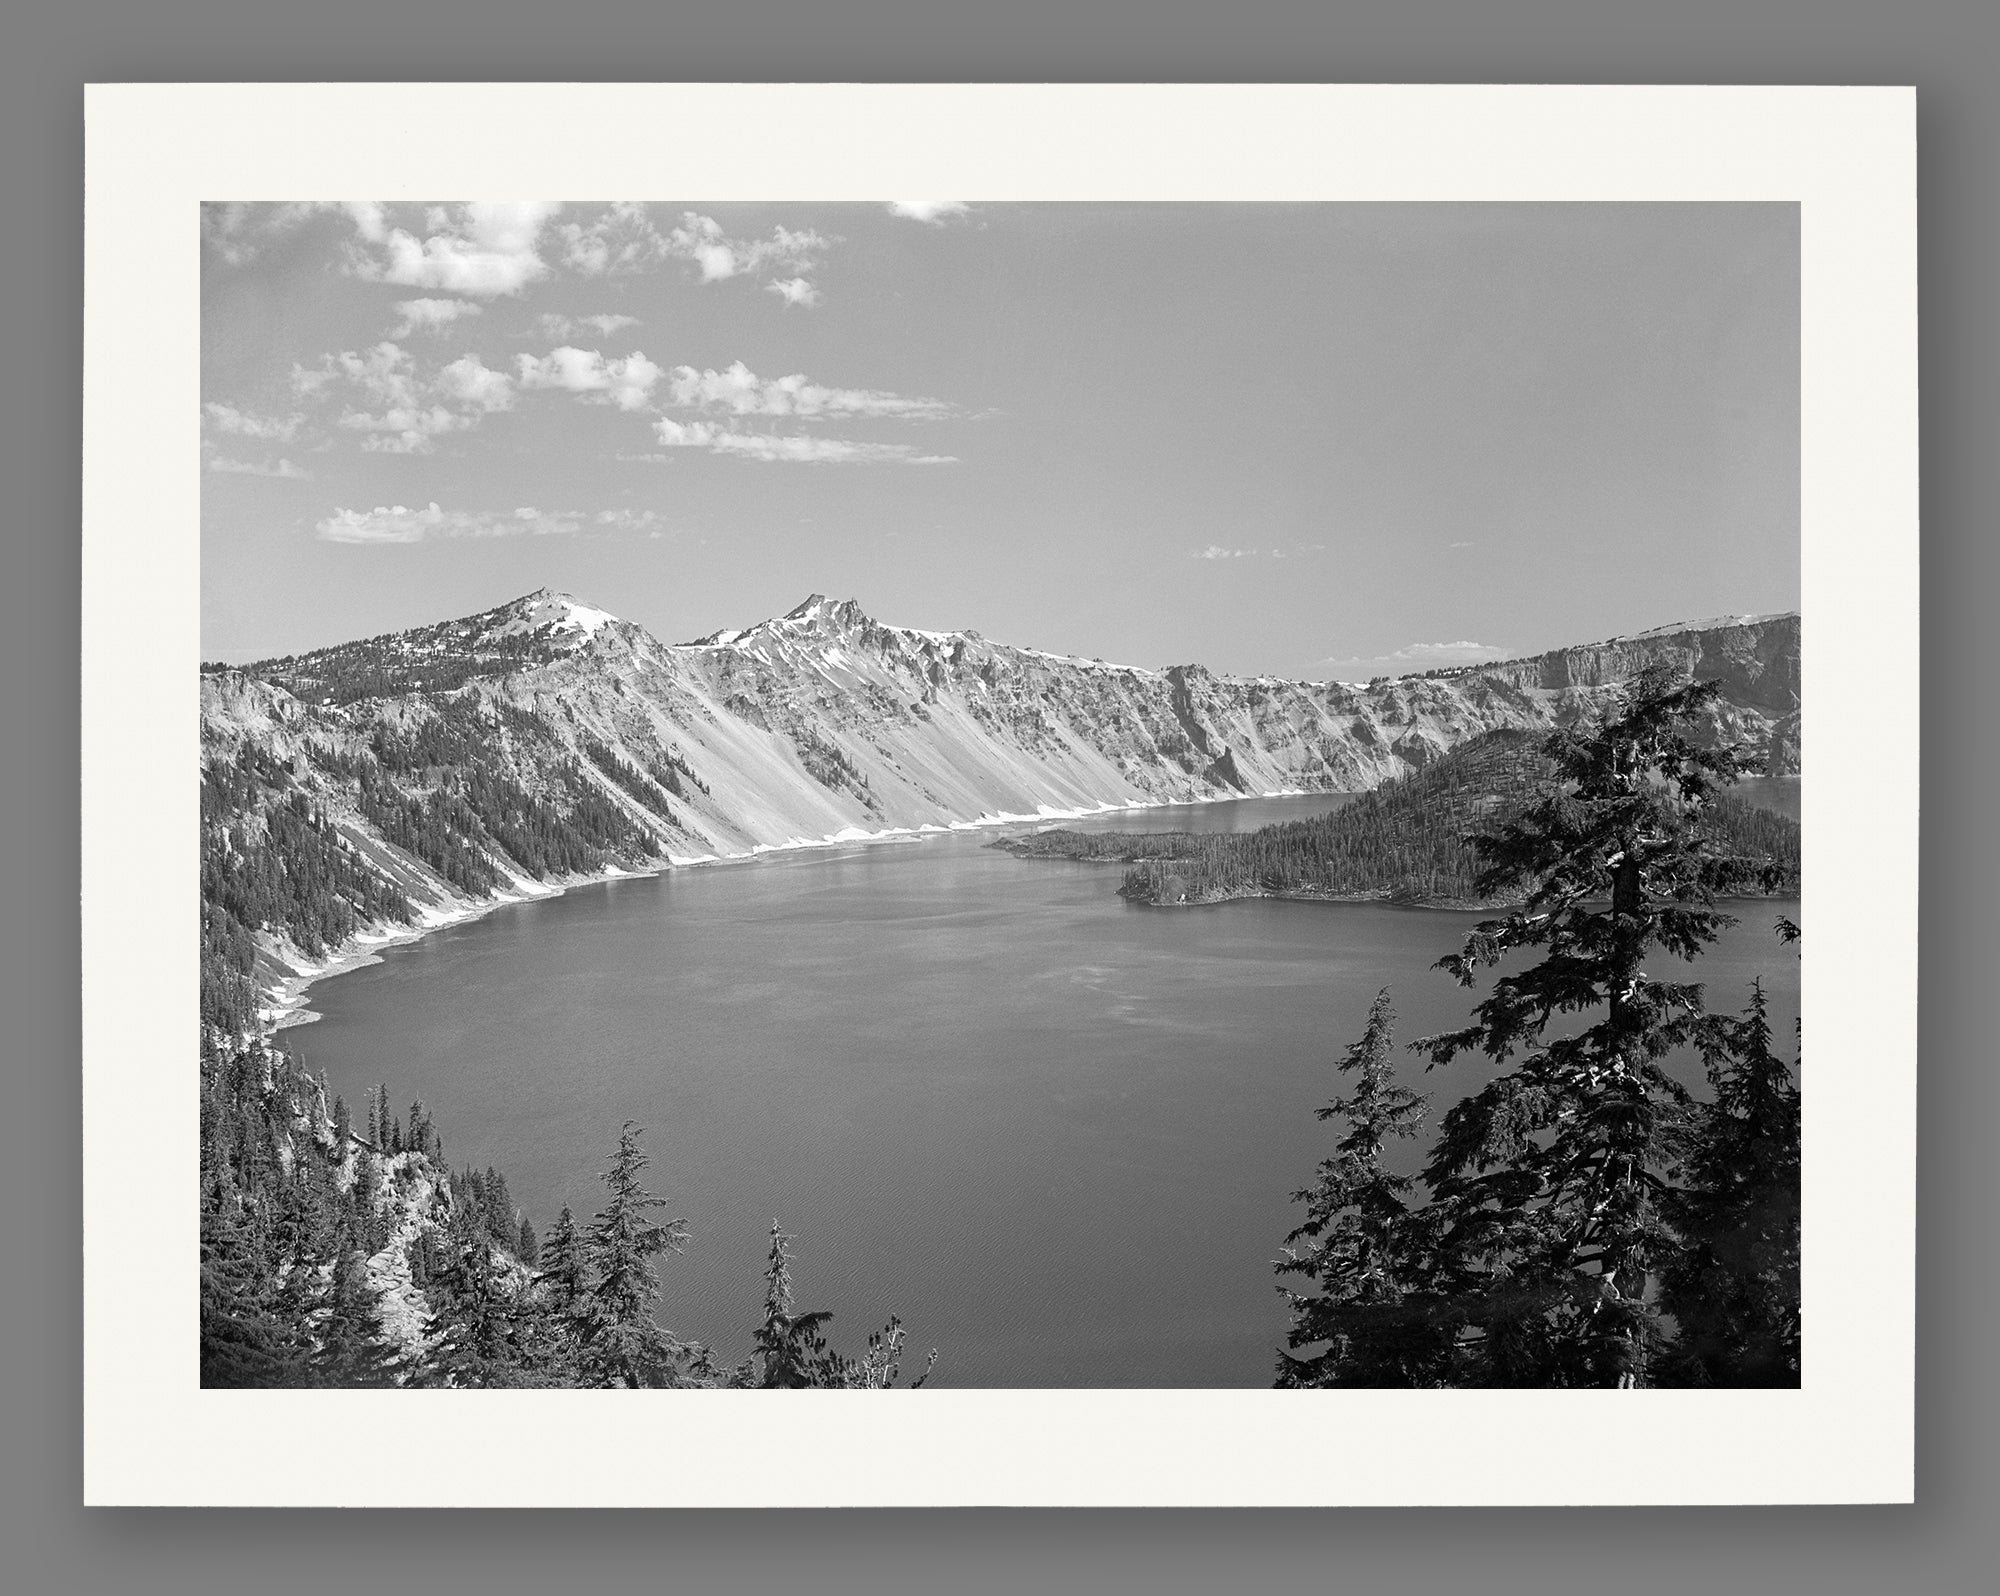 A fine art paper print of a vintage photograph of Crater Lake